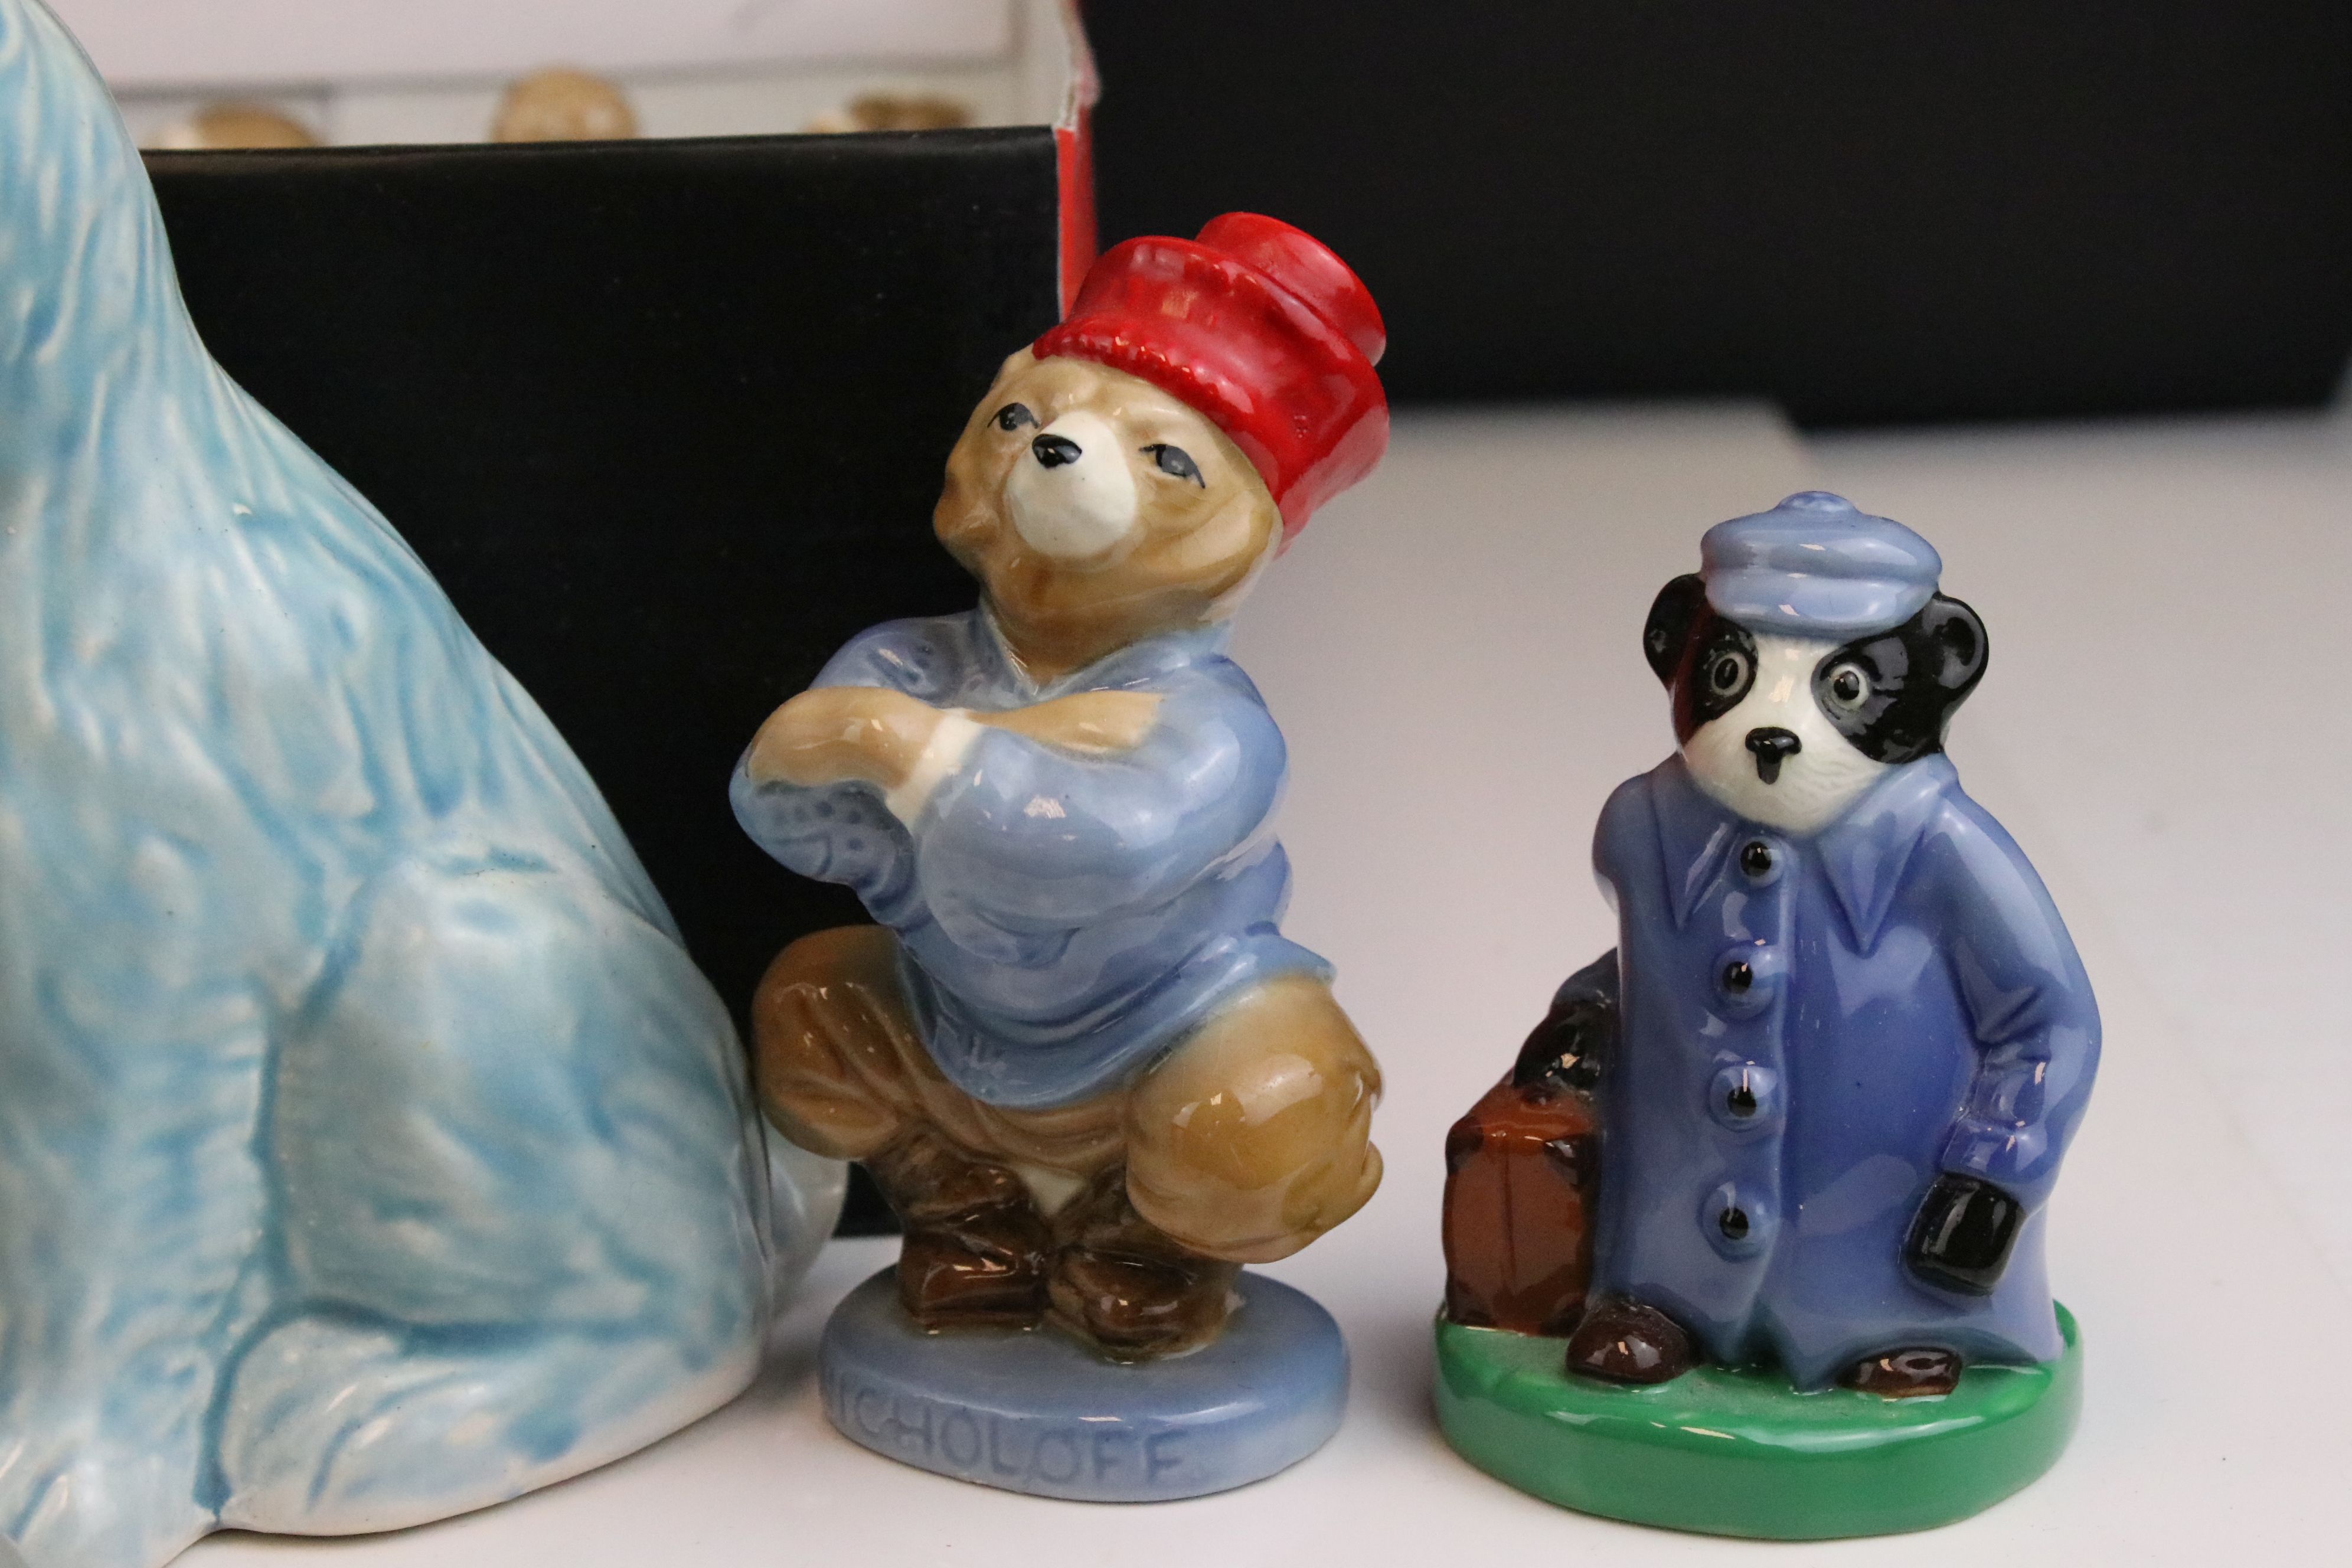 Collection of Ceramic Animals including Szeiler, Beswick, Wade, Sylvac style (approx. 29 in total) - Image 3 of 4